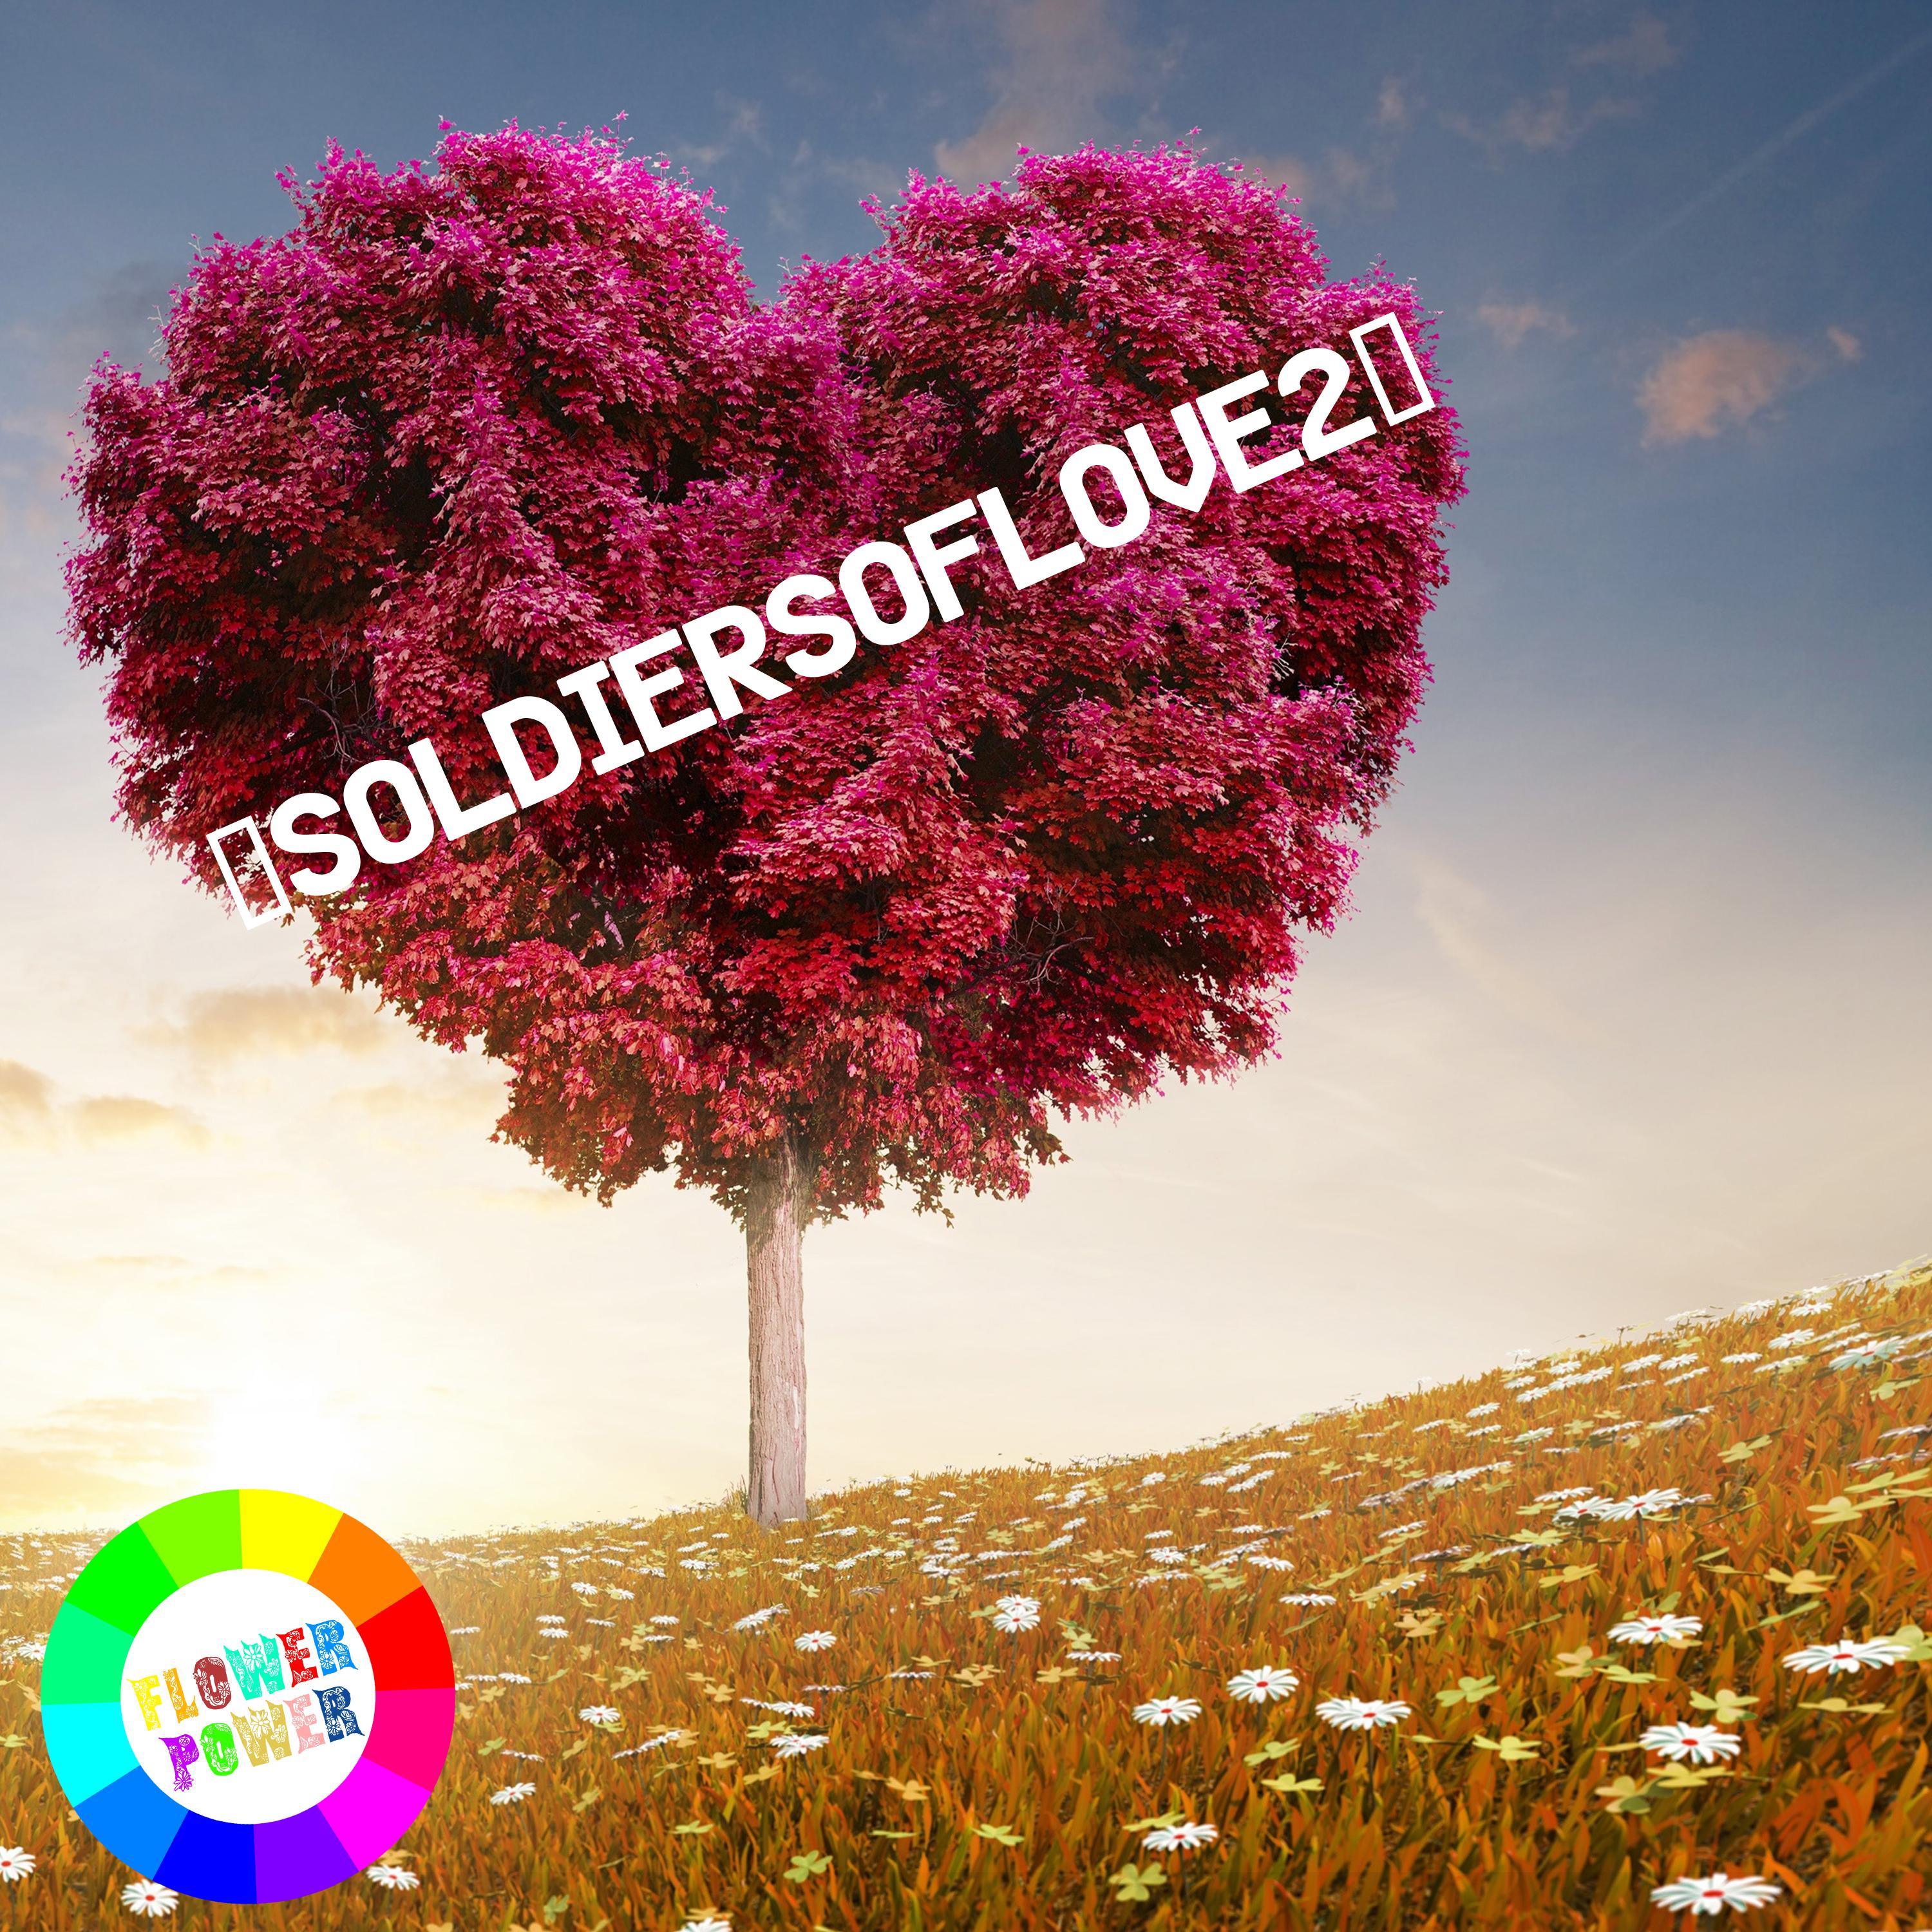 Soldiers of Love 2